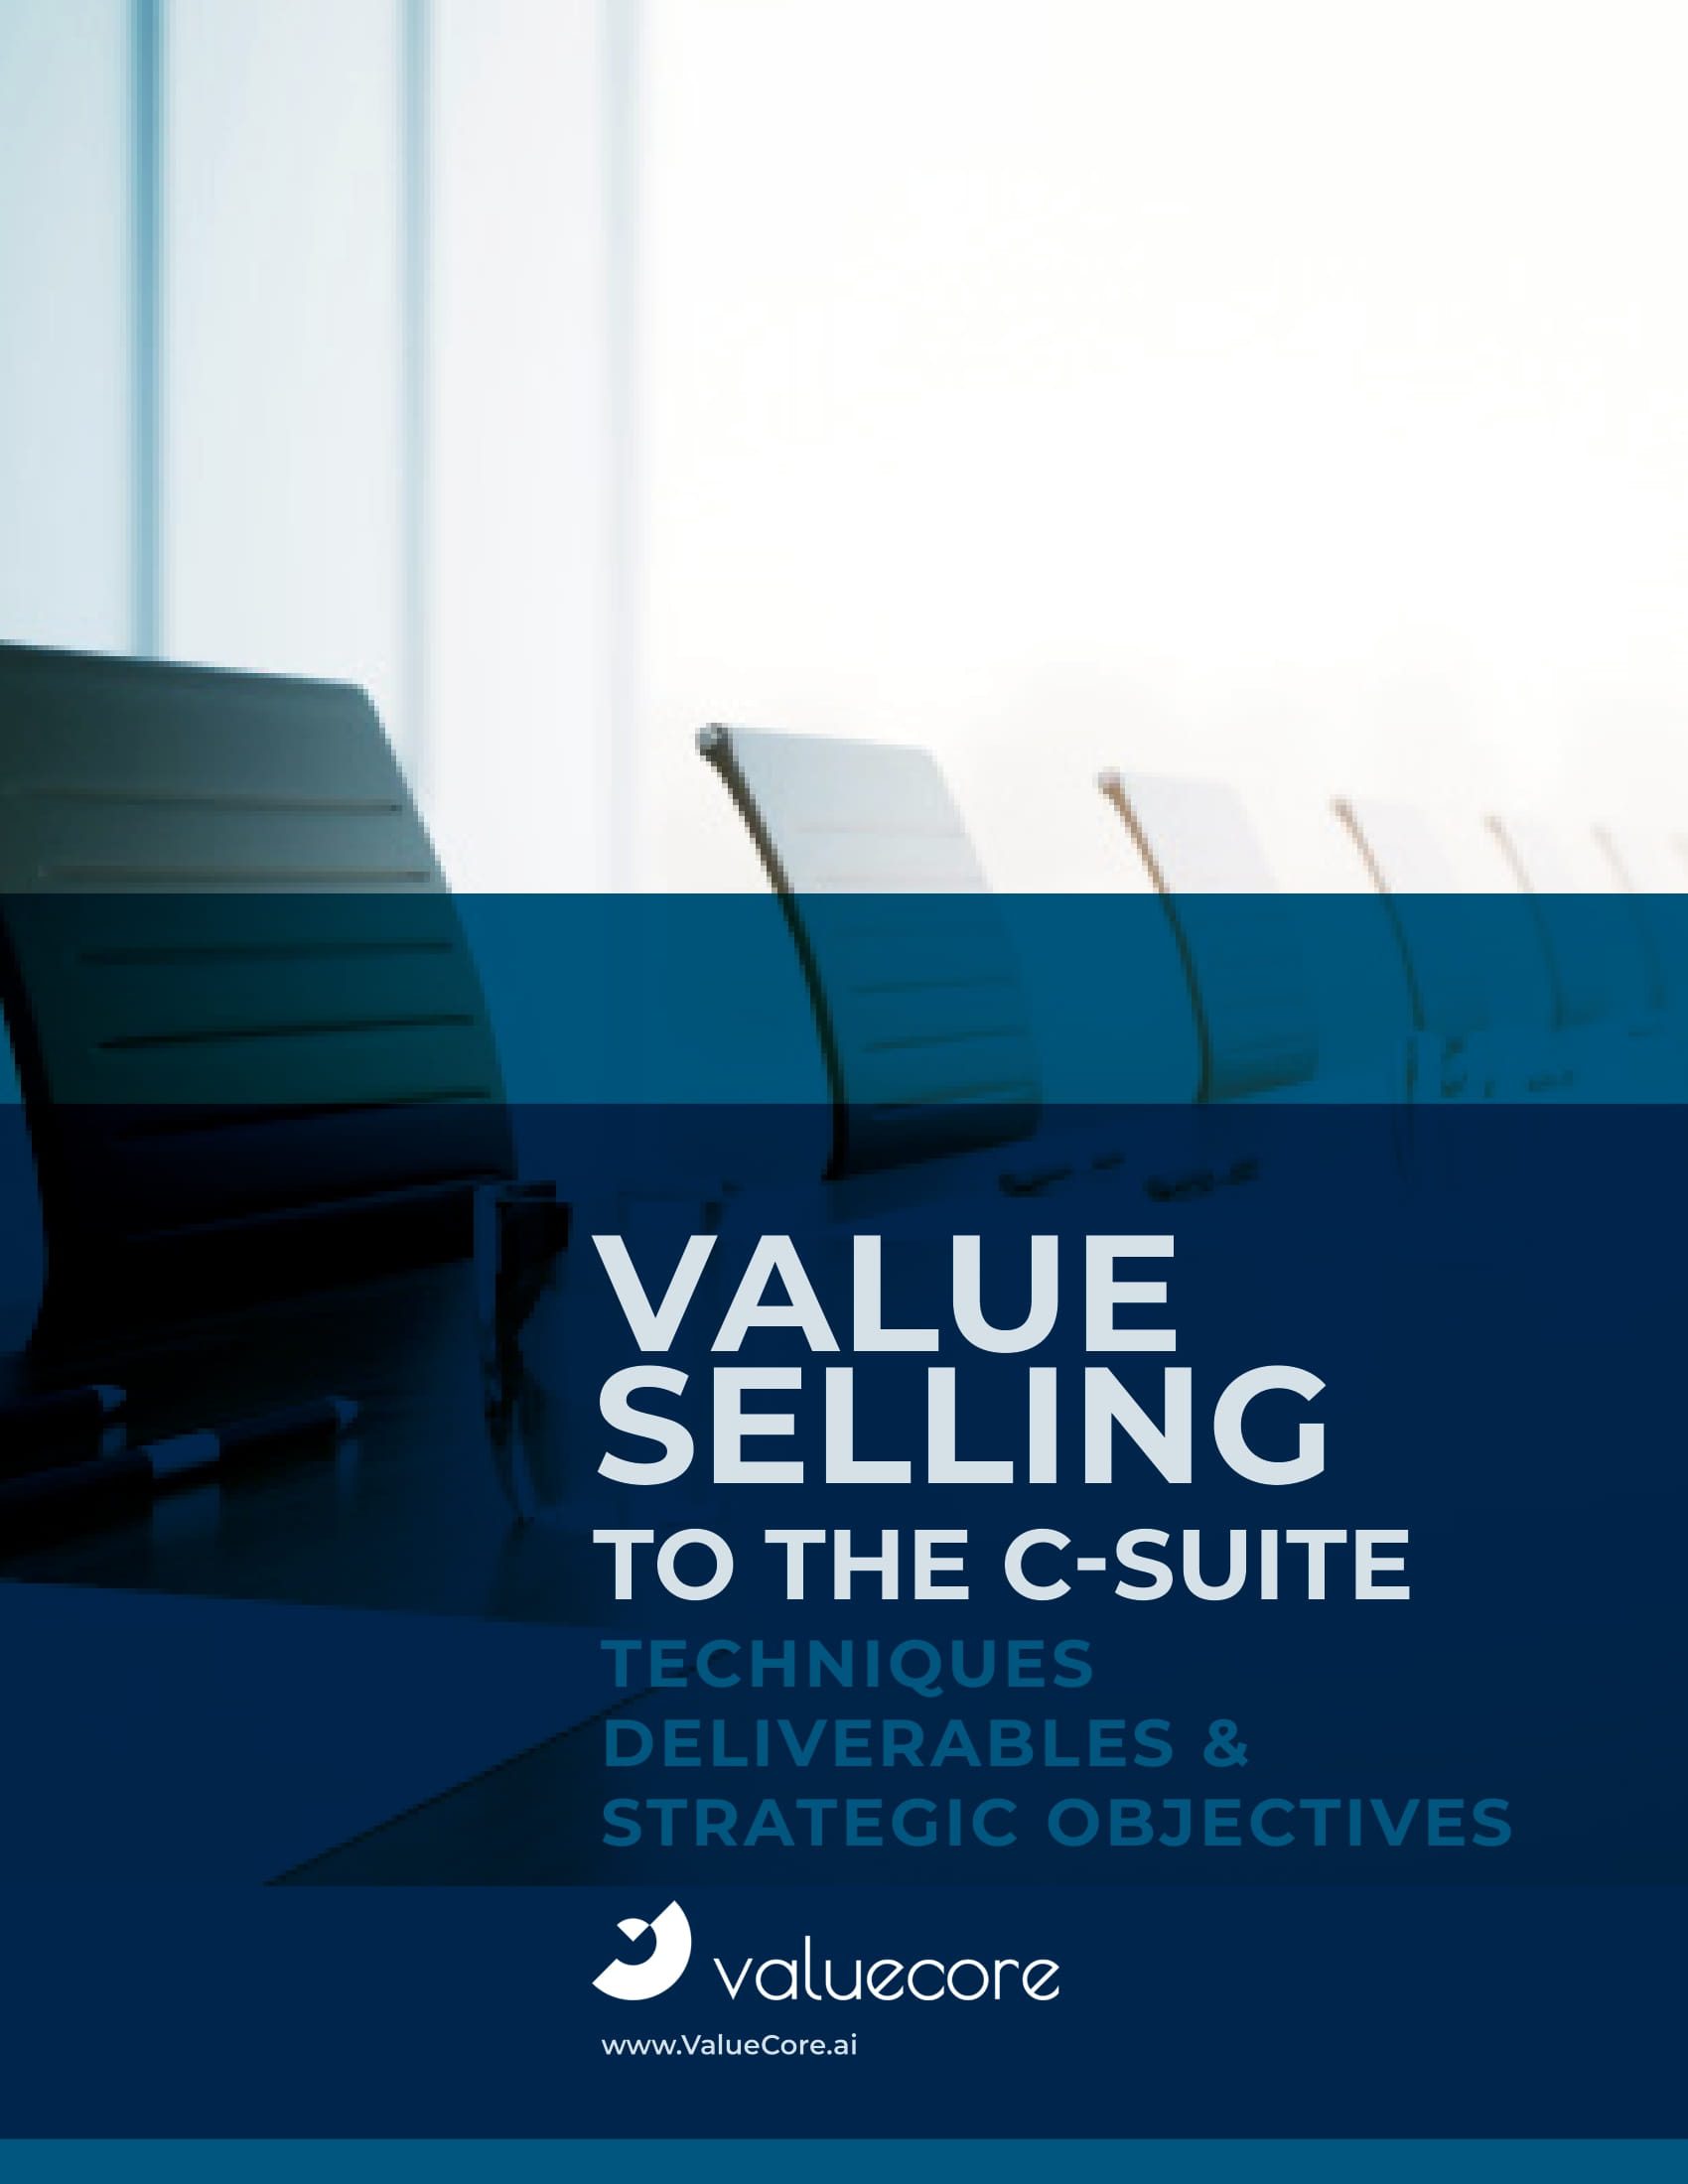 Image for <b>eBook: Value Selling to the C-Suite</b>